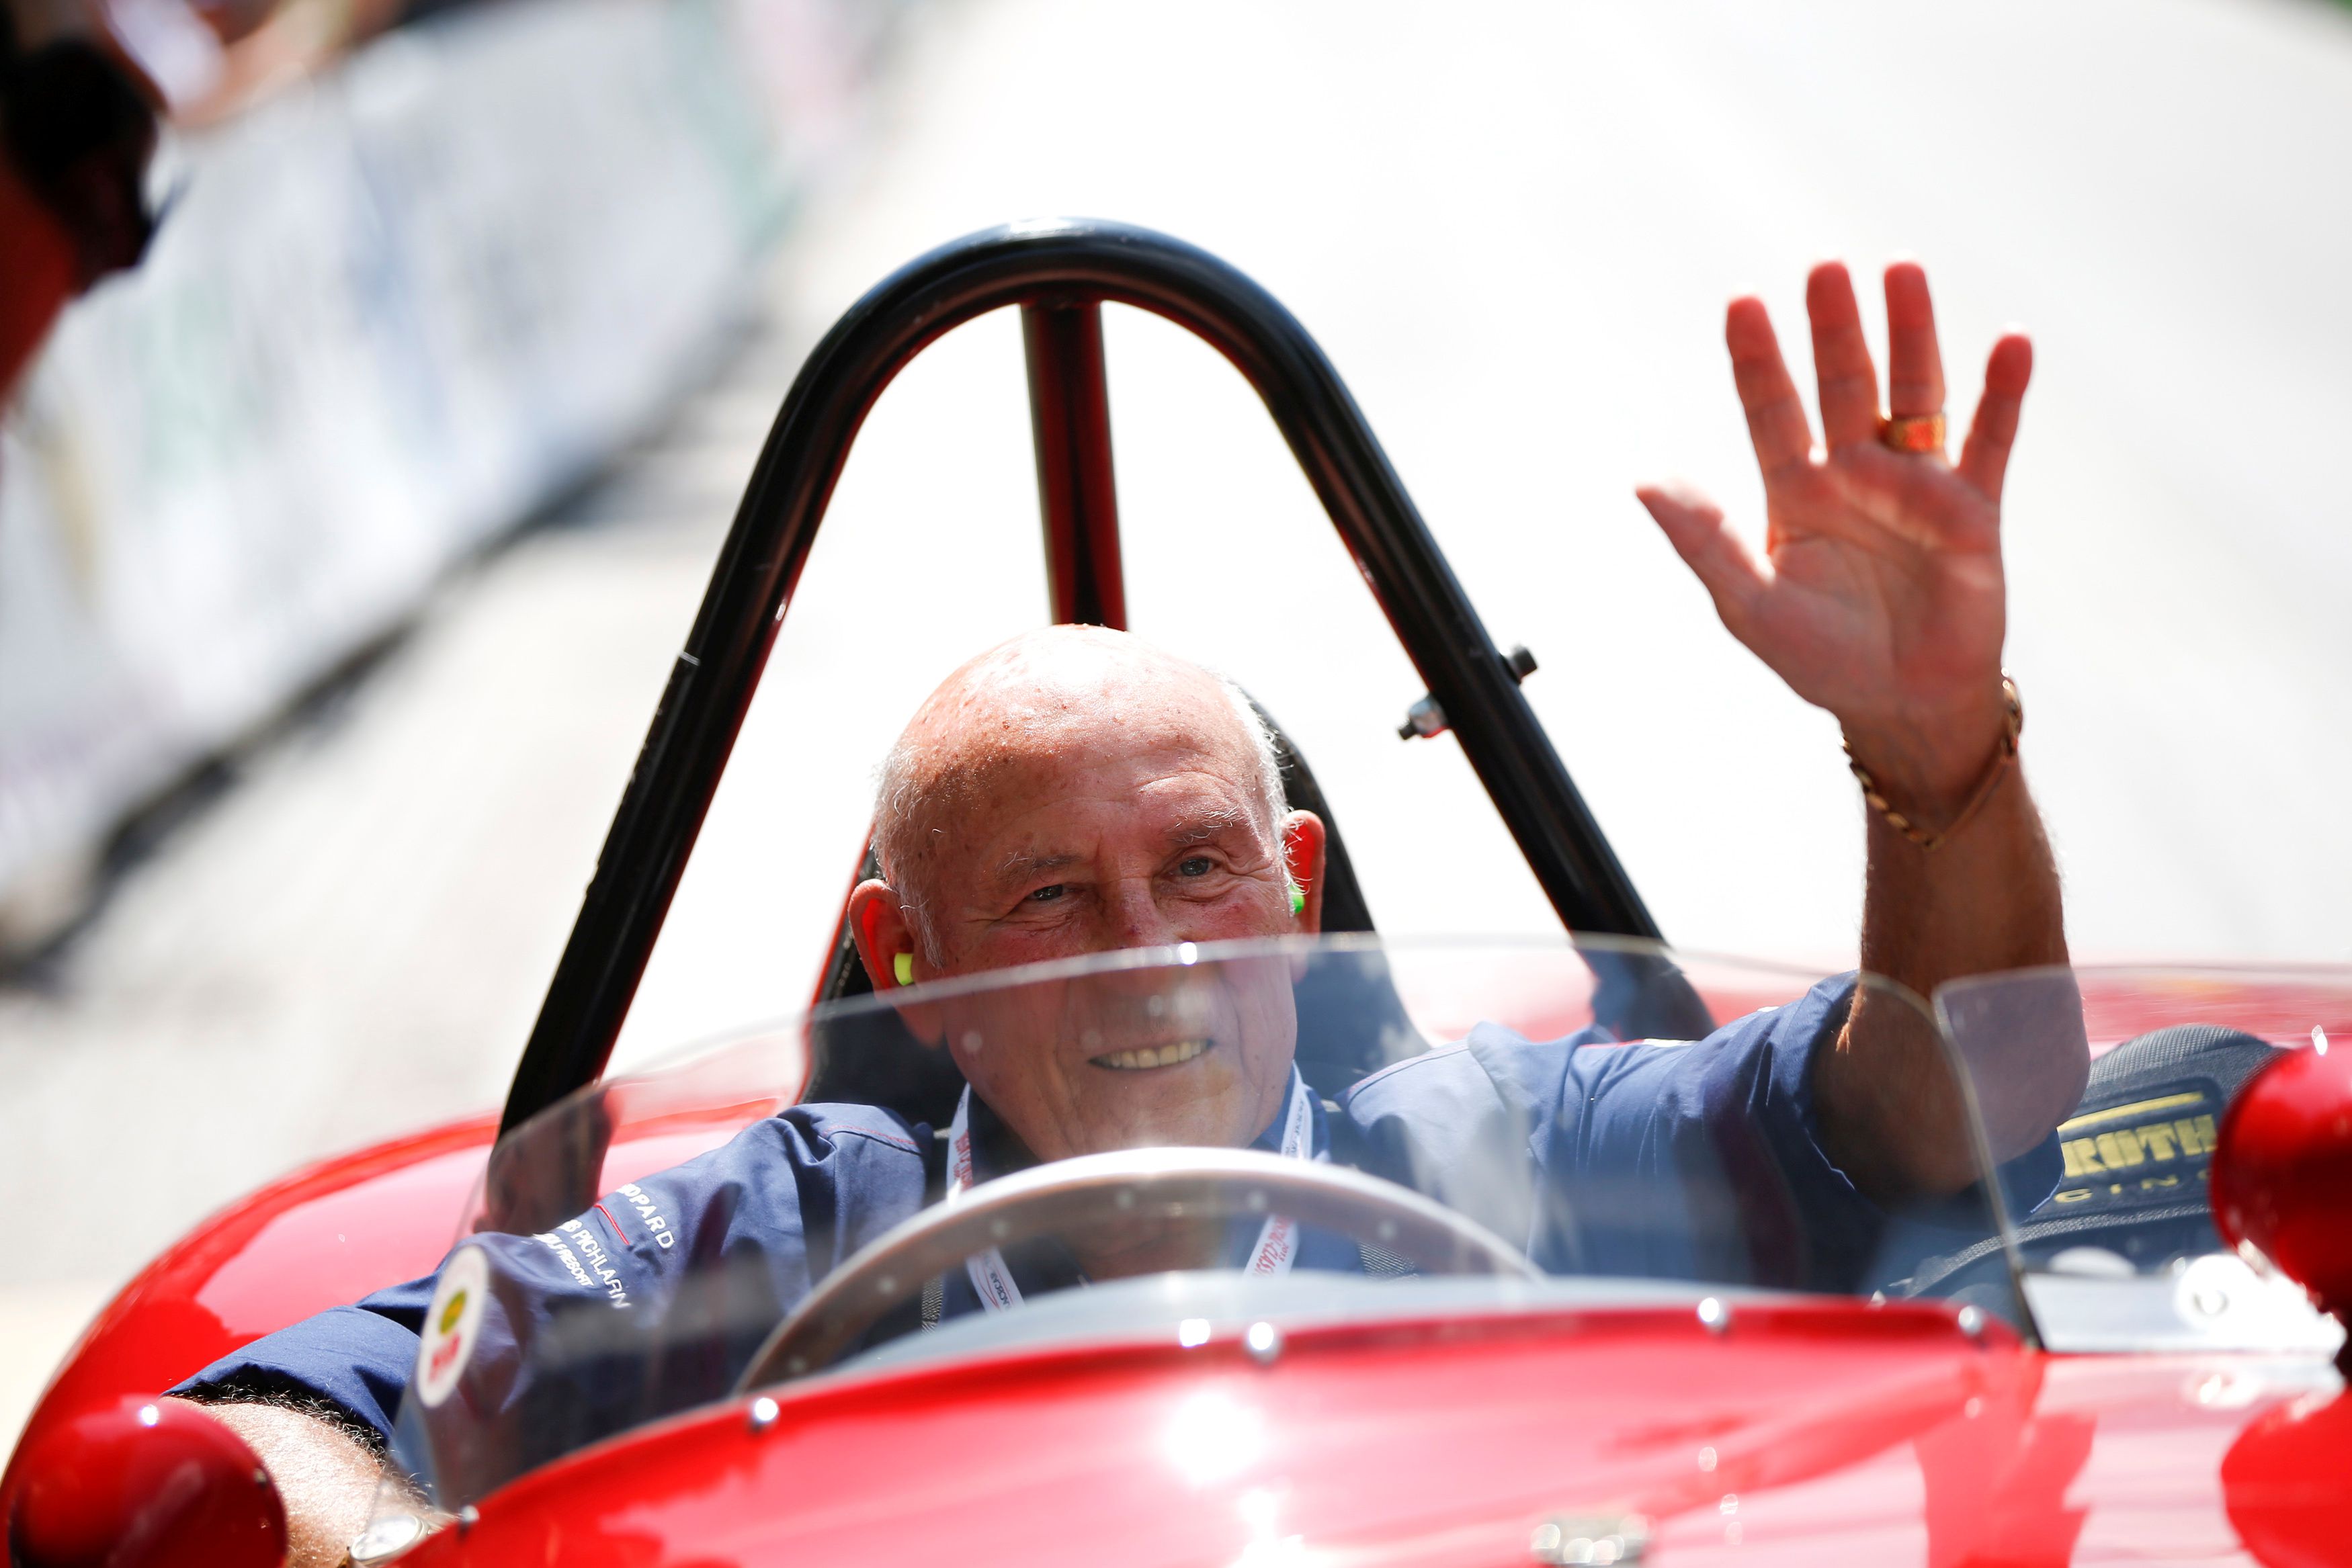 FILE PHOTO: Former English Formula One driver Stirling Moss waves to spectators as he sits in his 1955 Ferrari 750 Monza during the Ennstal Classic rally near the Austrian village of Groebming July 20, 2013. REUTERS/Leonhard Foeger (AUSTRIA - Tags: SPORT MOTORSPORT SOCIETY)/File Photo